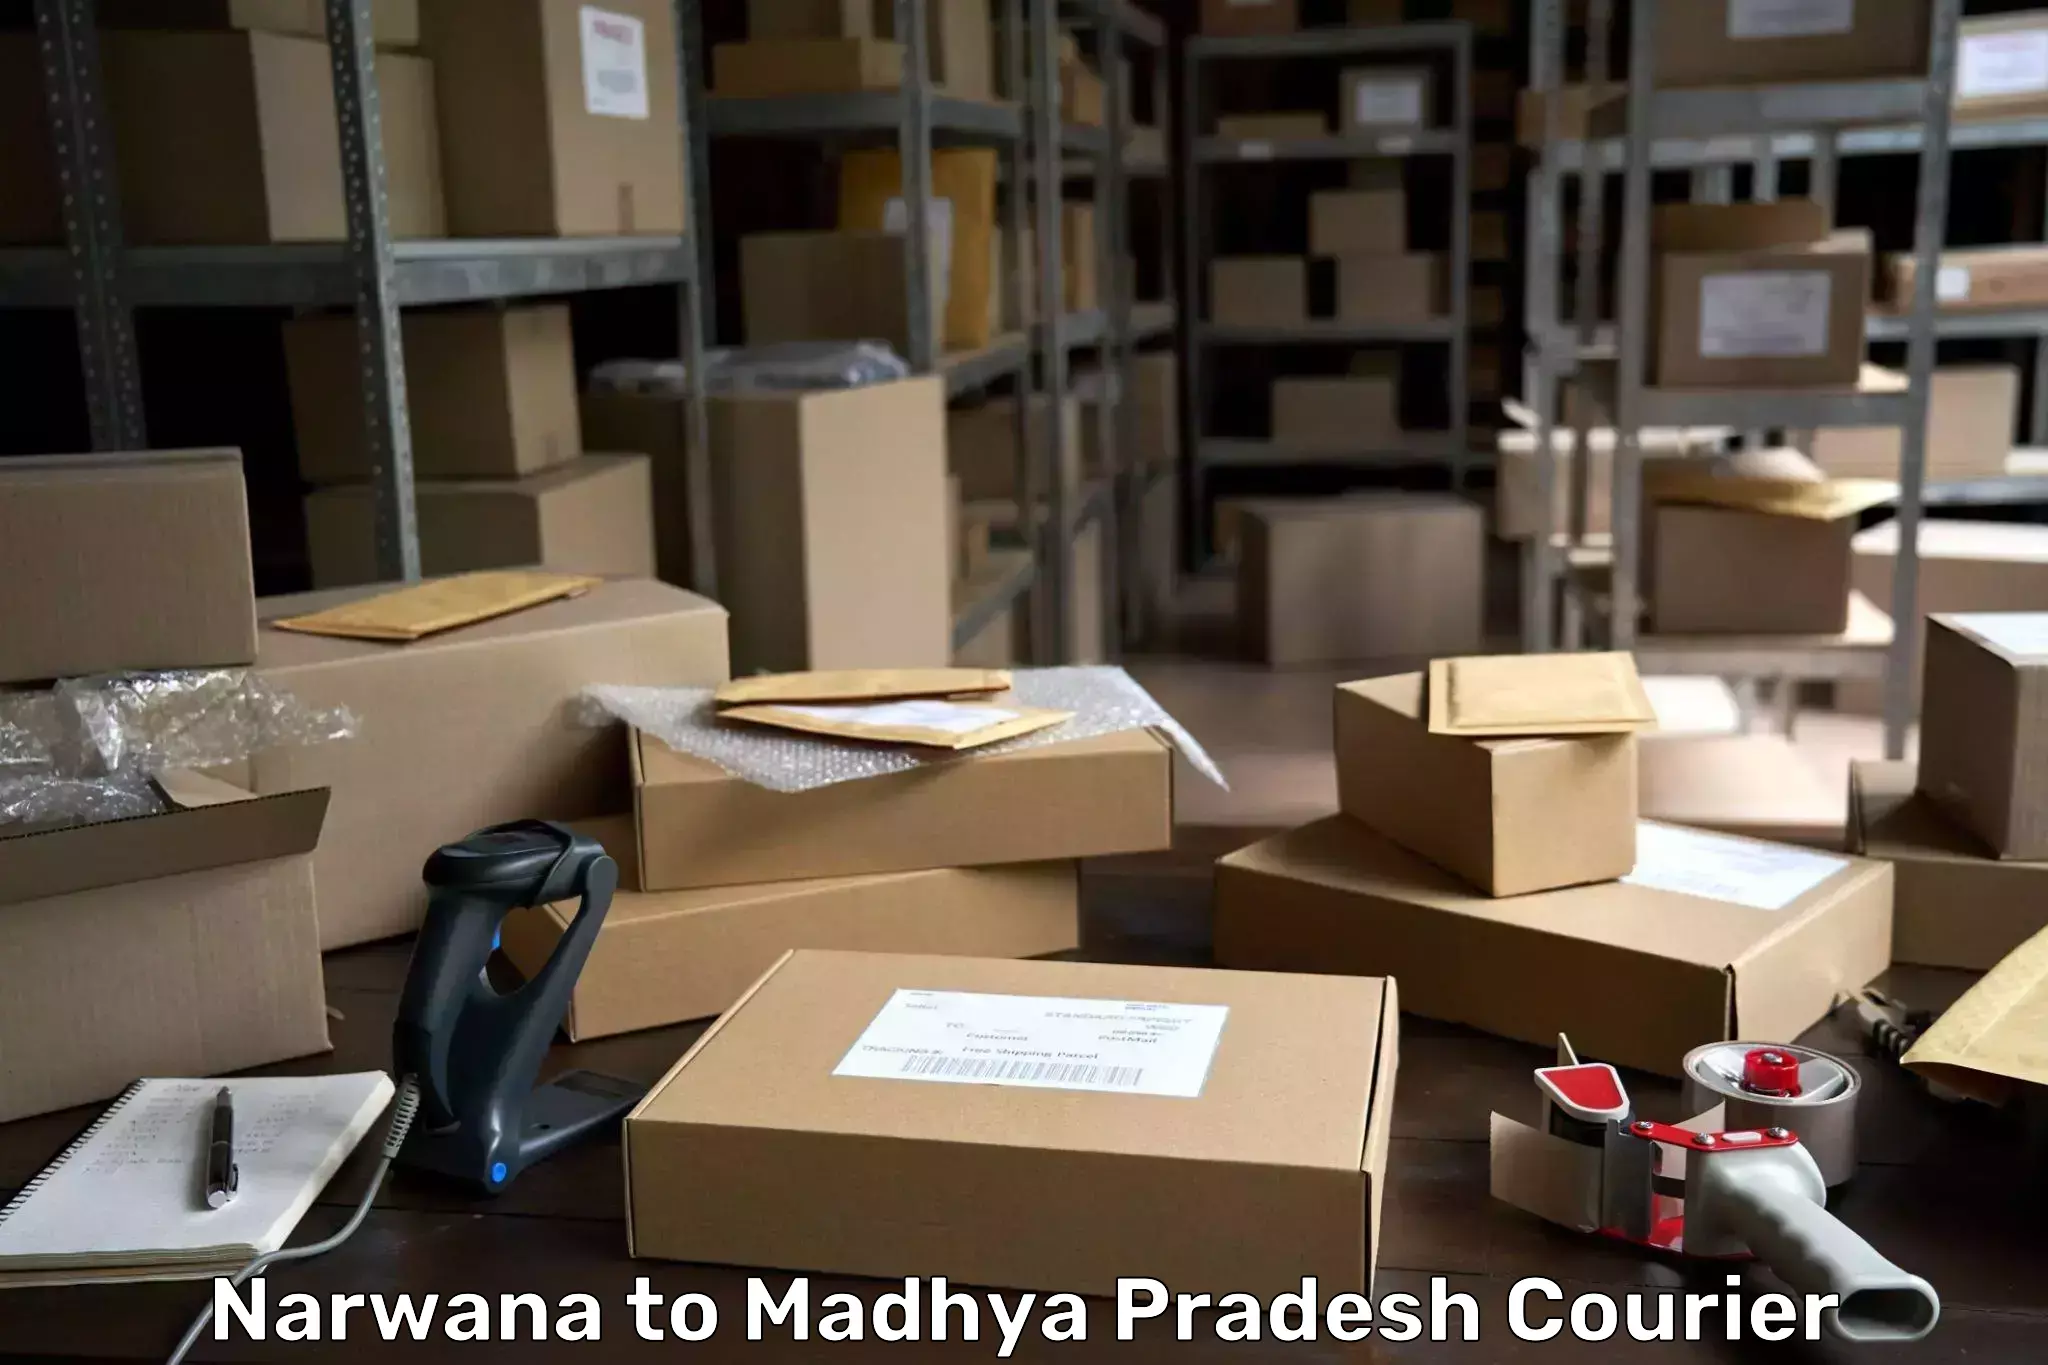 Multi-national courier services Narwana to Bhind